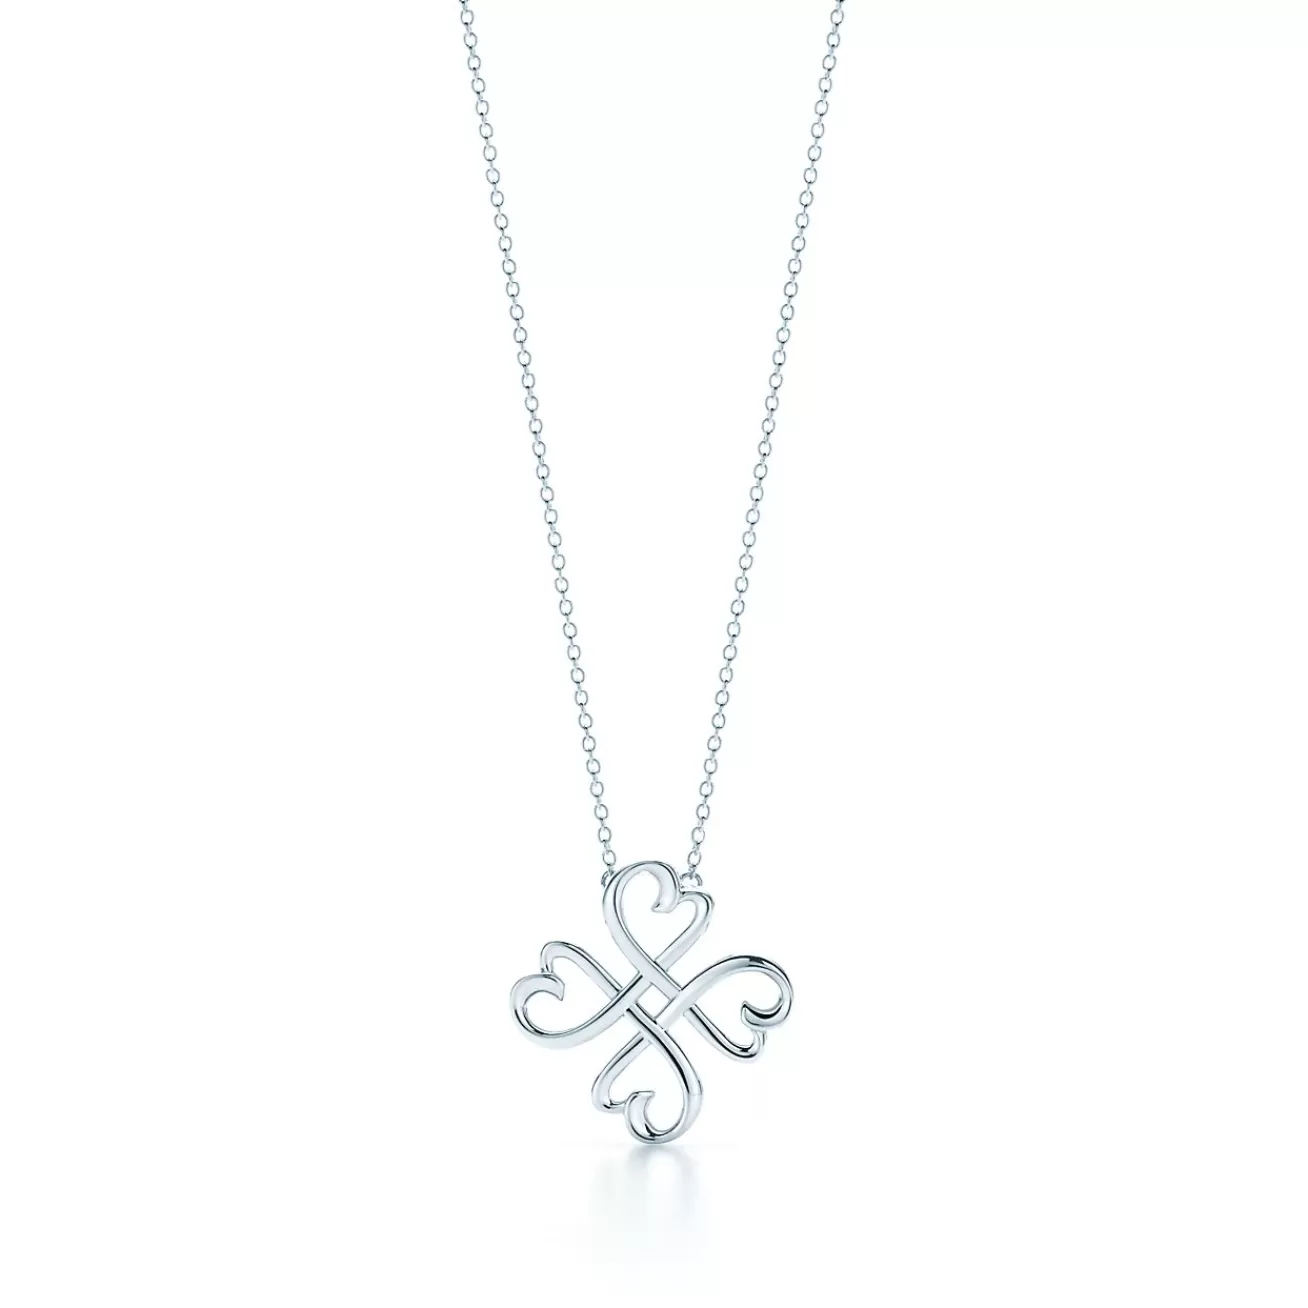 Tiffany & Co. Paloma Picasso® Loving Heart pendant in sterling silver. | ^ Necklaces & Pendants | Sterling Silver Jewelry